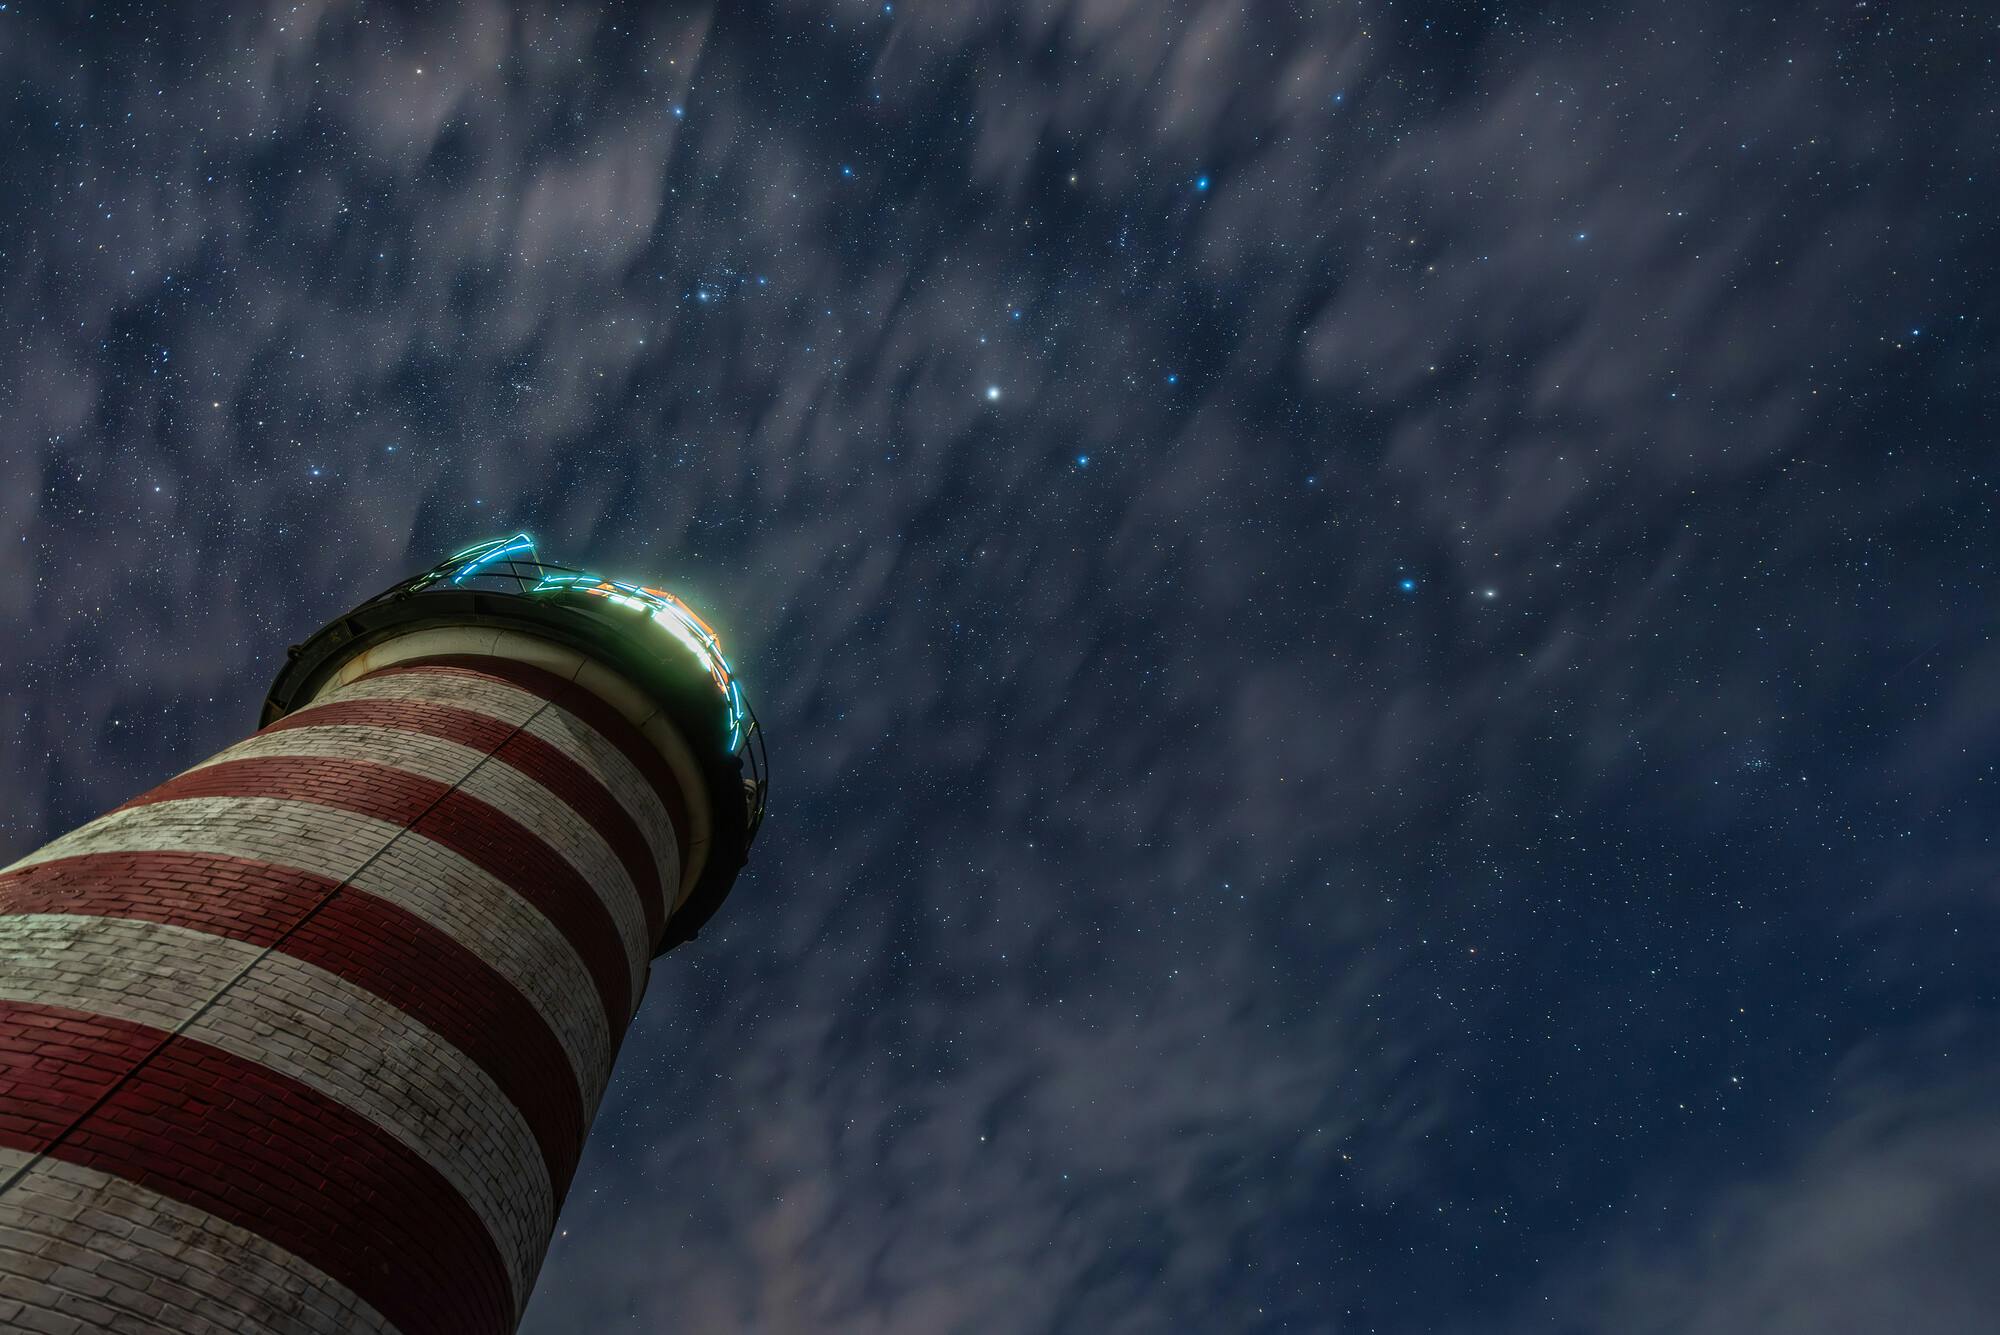 Stars and Clouds Over West Quoddy Head Lighthouse